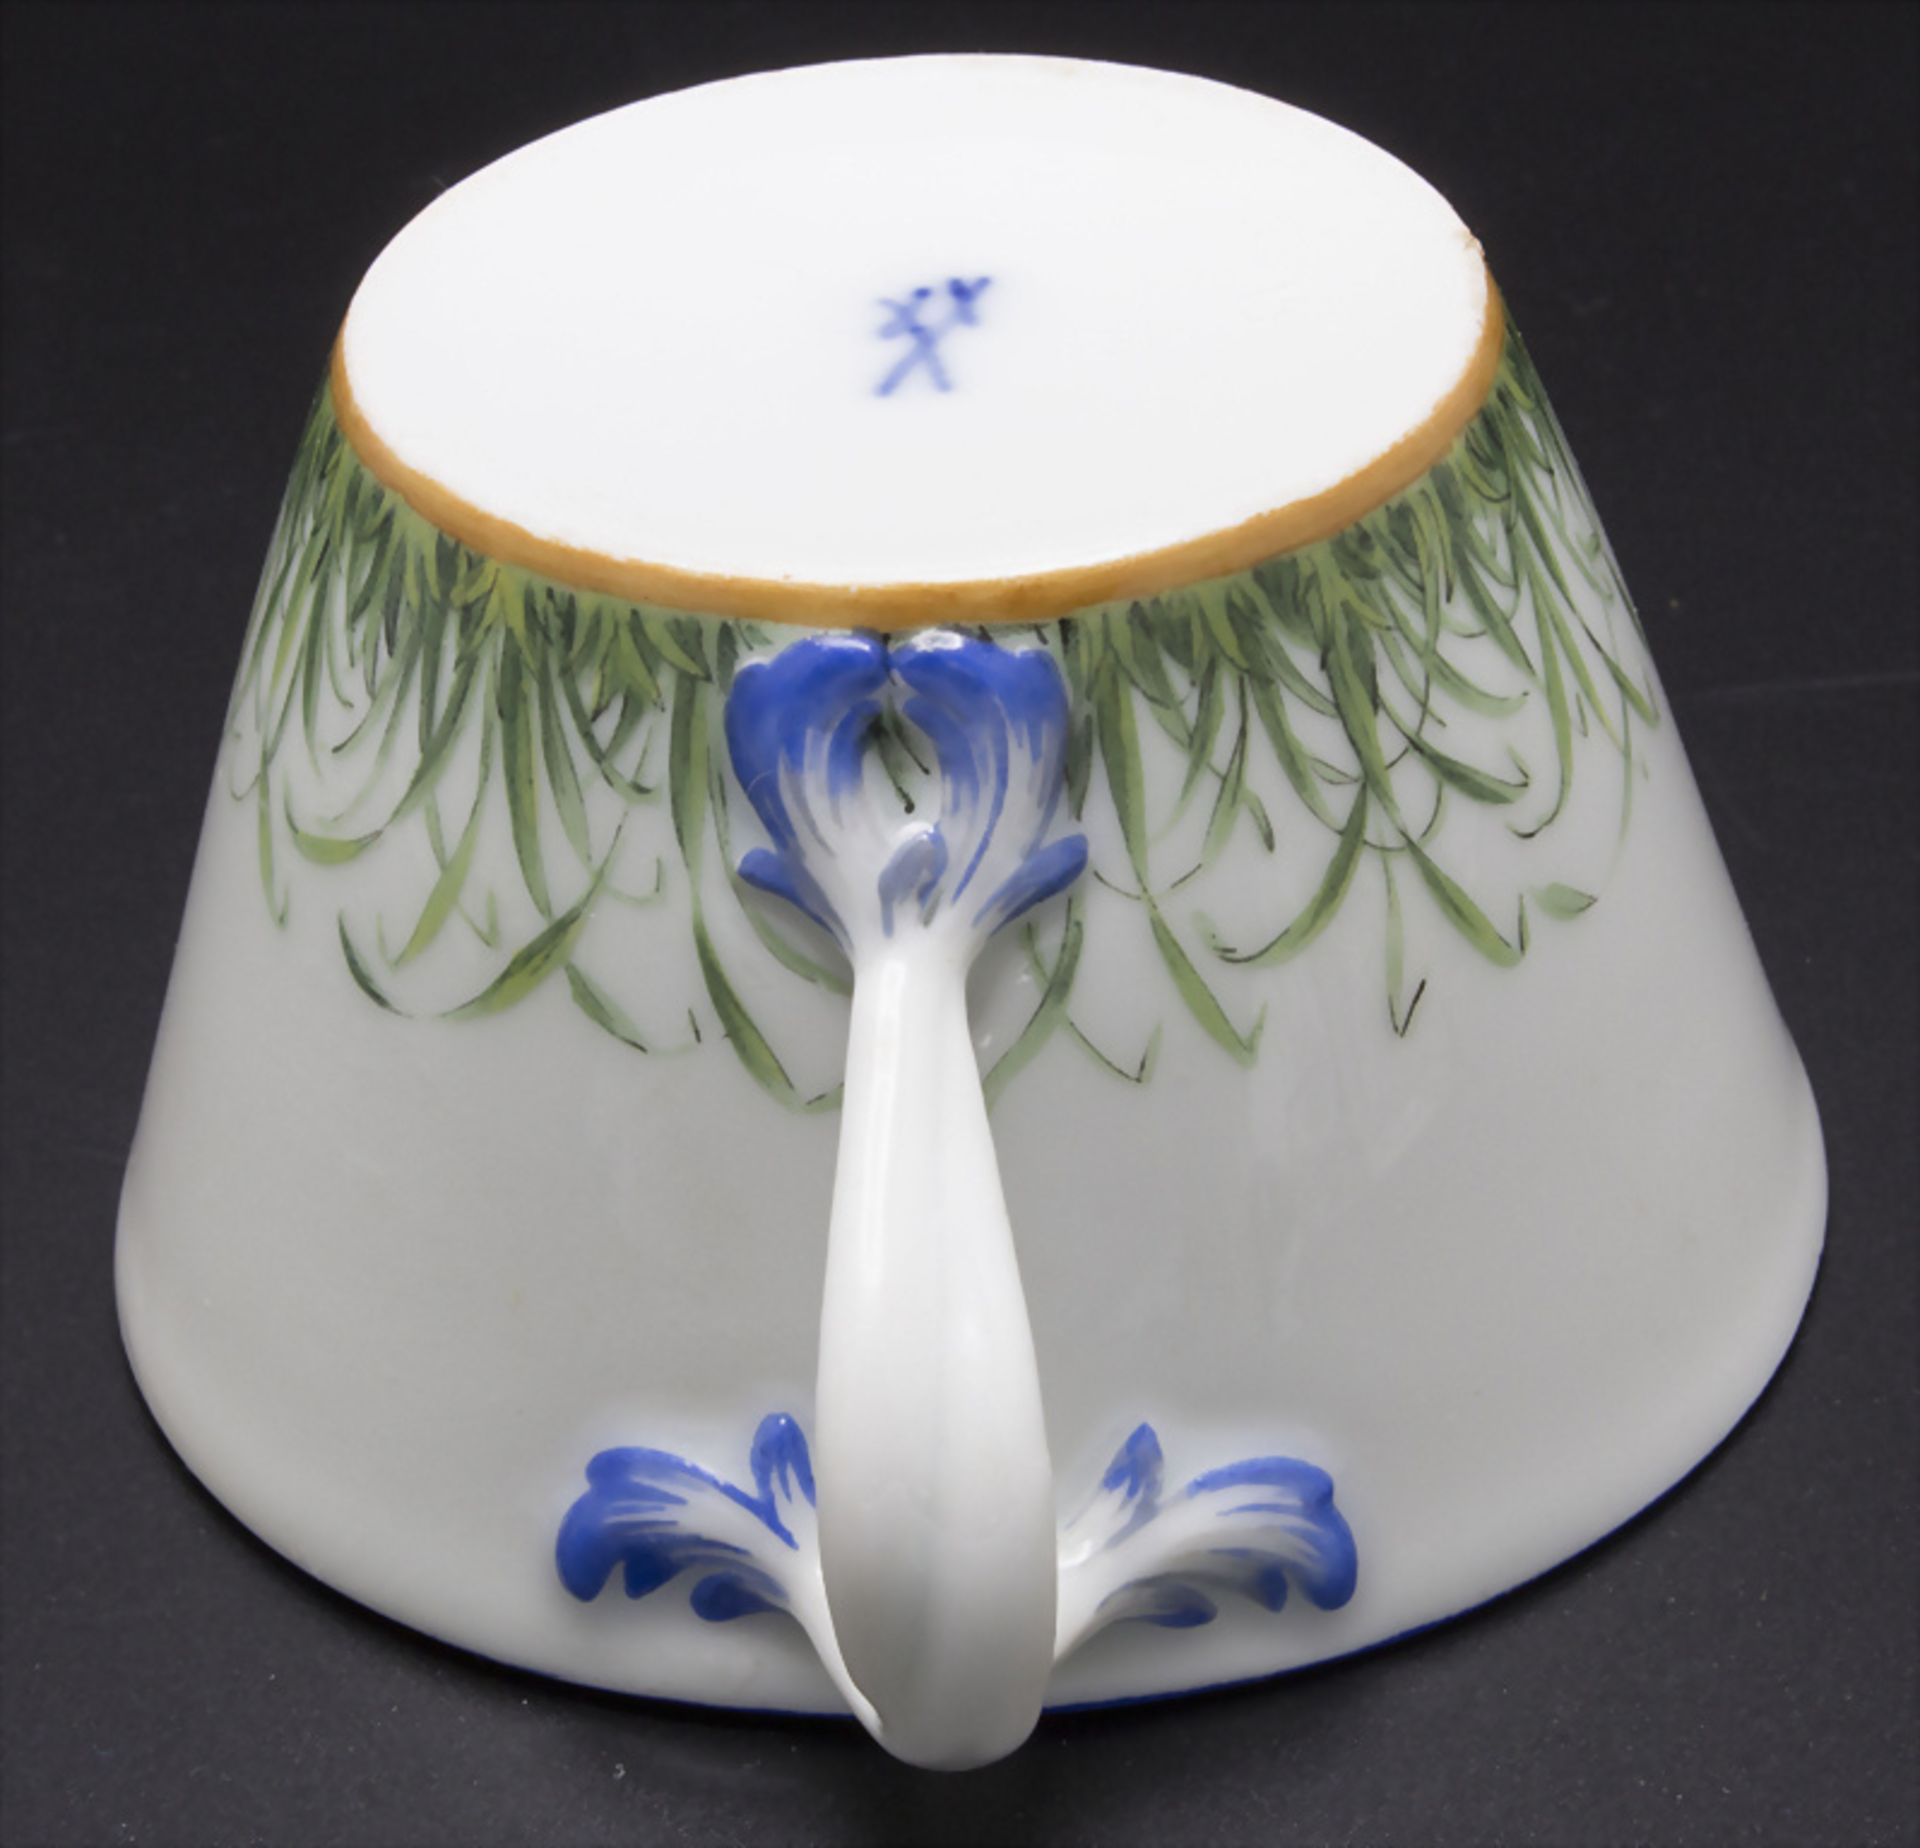 Tasse und UT mit Monogramm / A cup with saucer with monogram, Meissen, Anfang 19. Jh. - Image 16 of 18